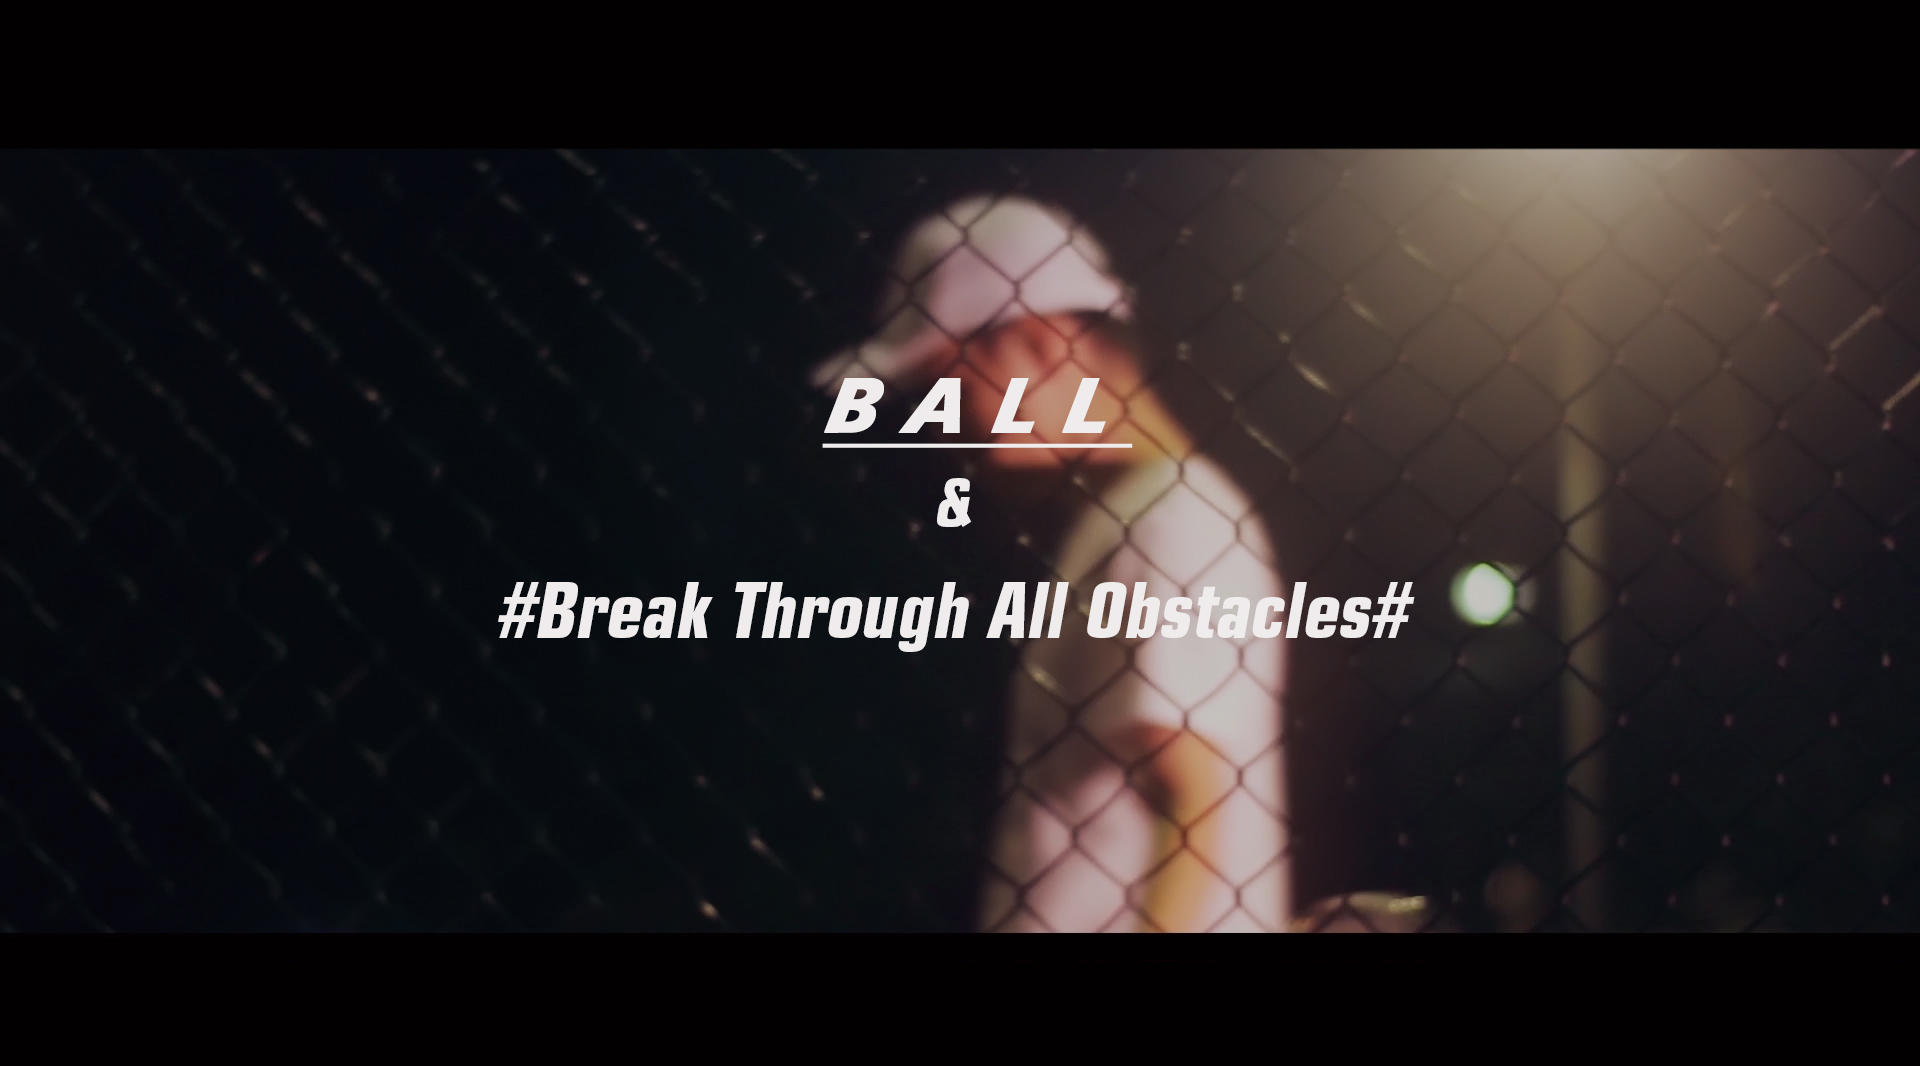 #Break Through All Obstacles#About Ball